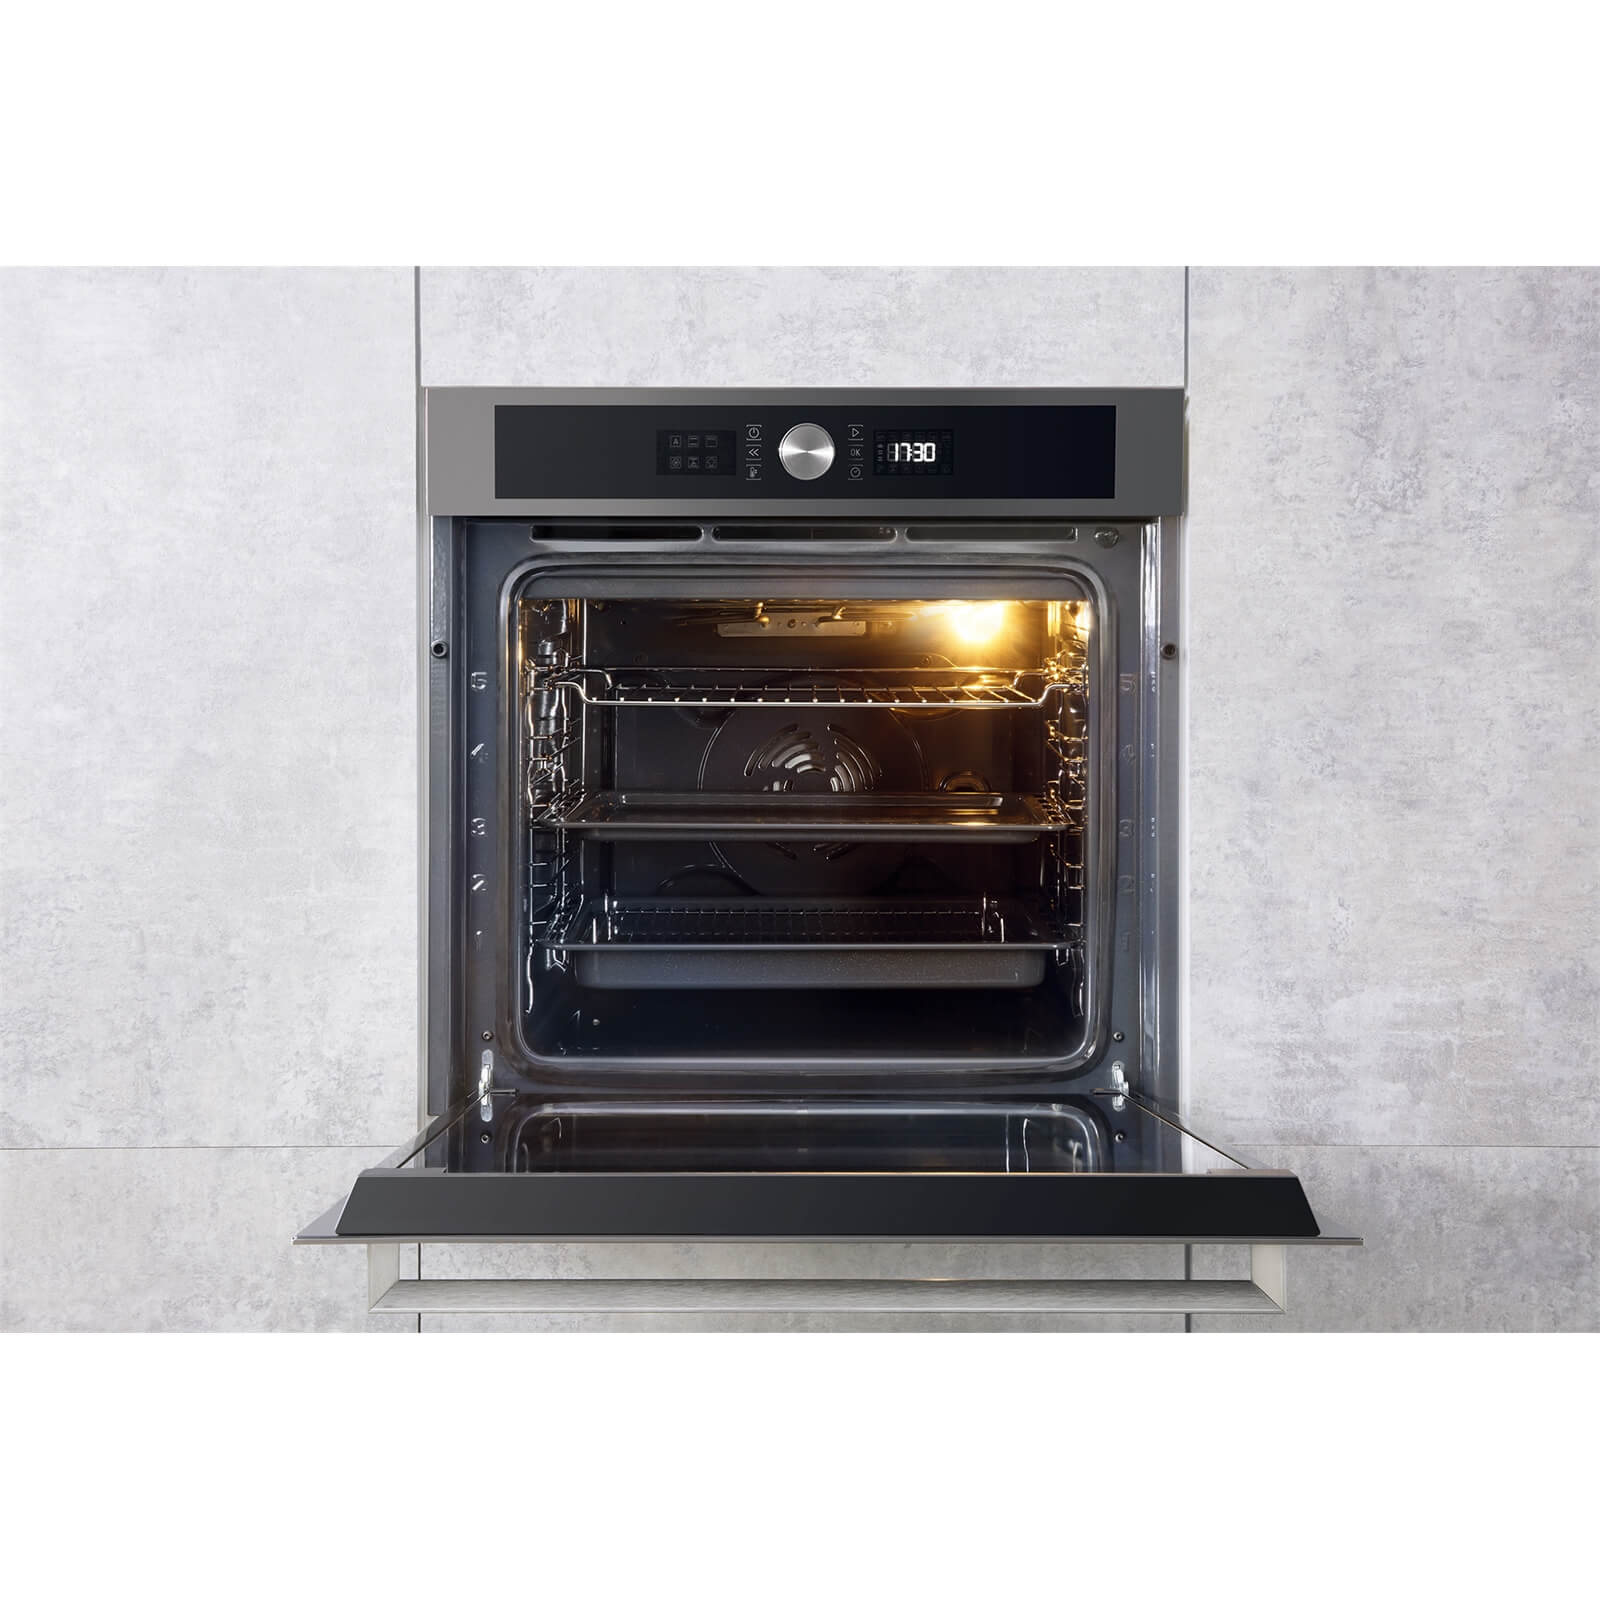 Hotpoint Class 5 SI5 851 C IX Built-in Electric Oven - Stainless Steel